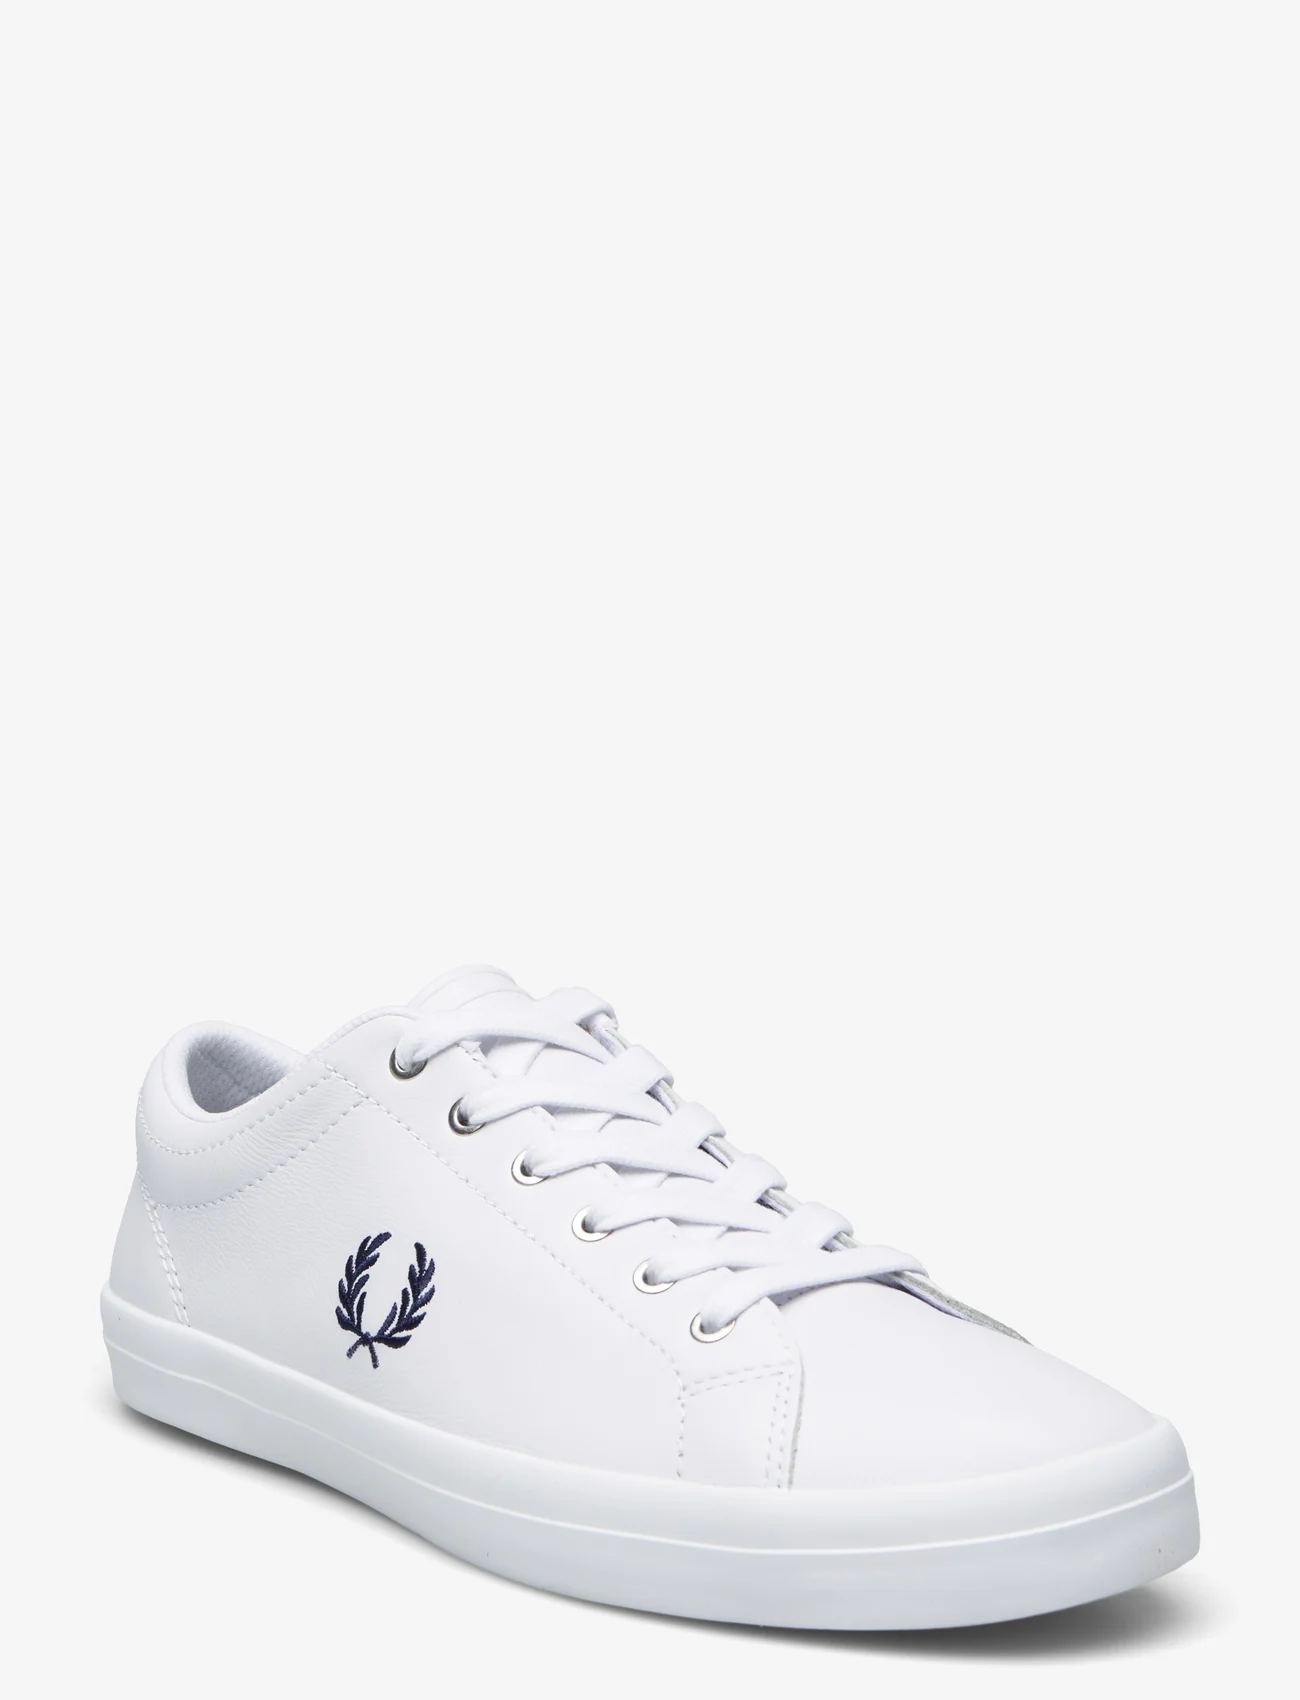 Fred Perry - BASELINE LEATHER - lav ankel - white/navy - 0